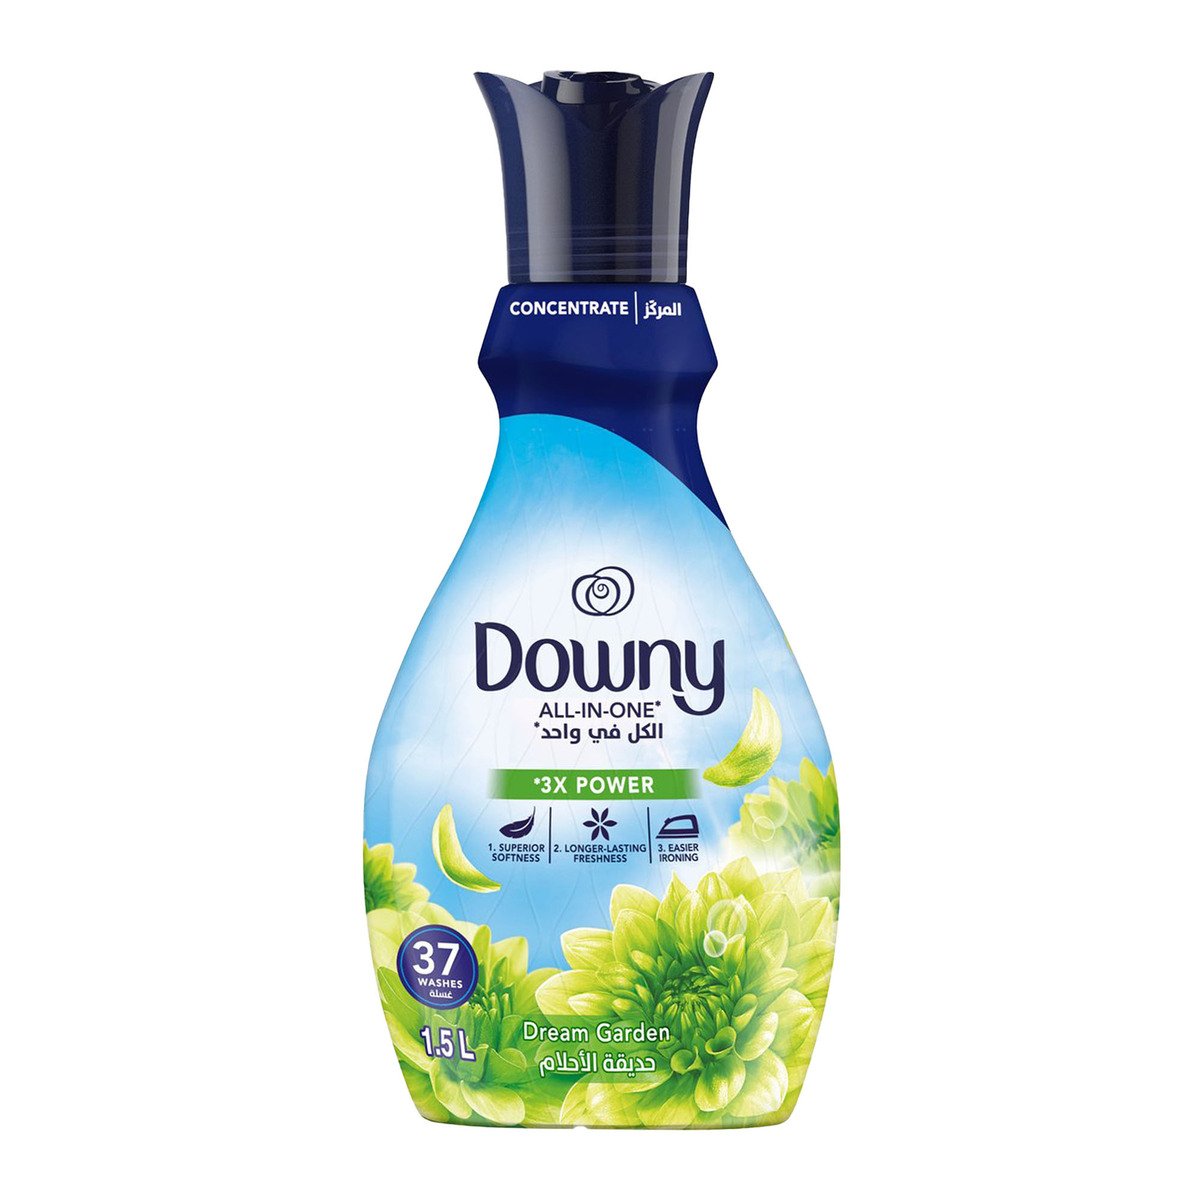 Downy Dream Garden Concentrate Fabric Softener Value Pack 1.5Litre